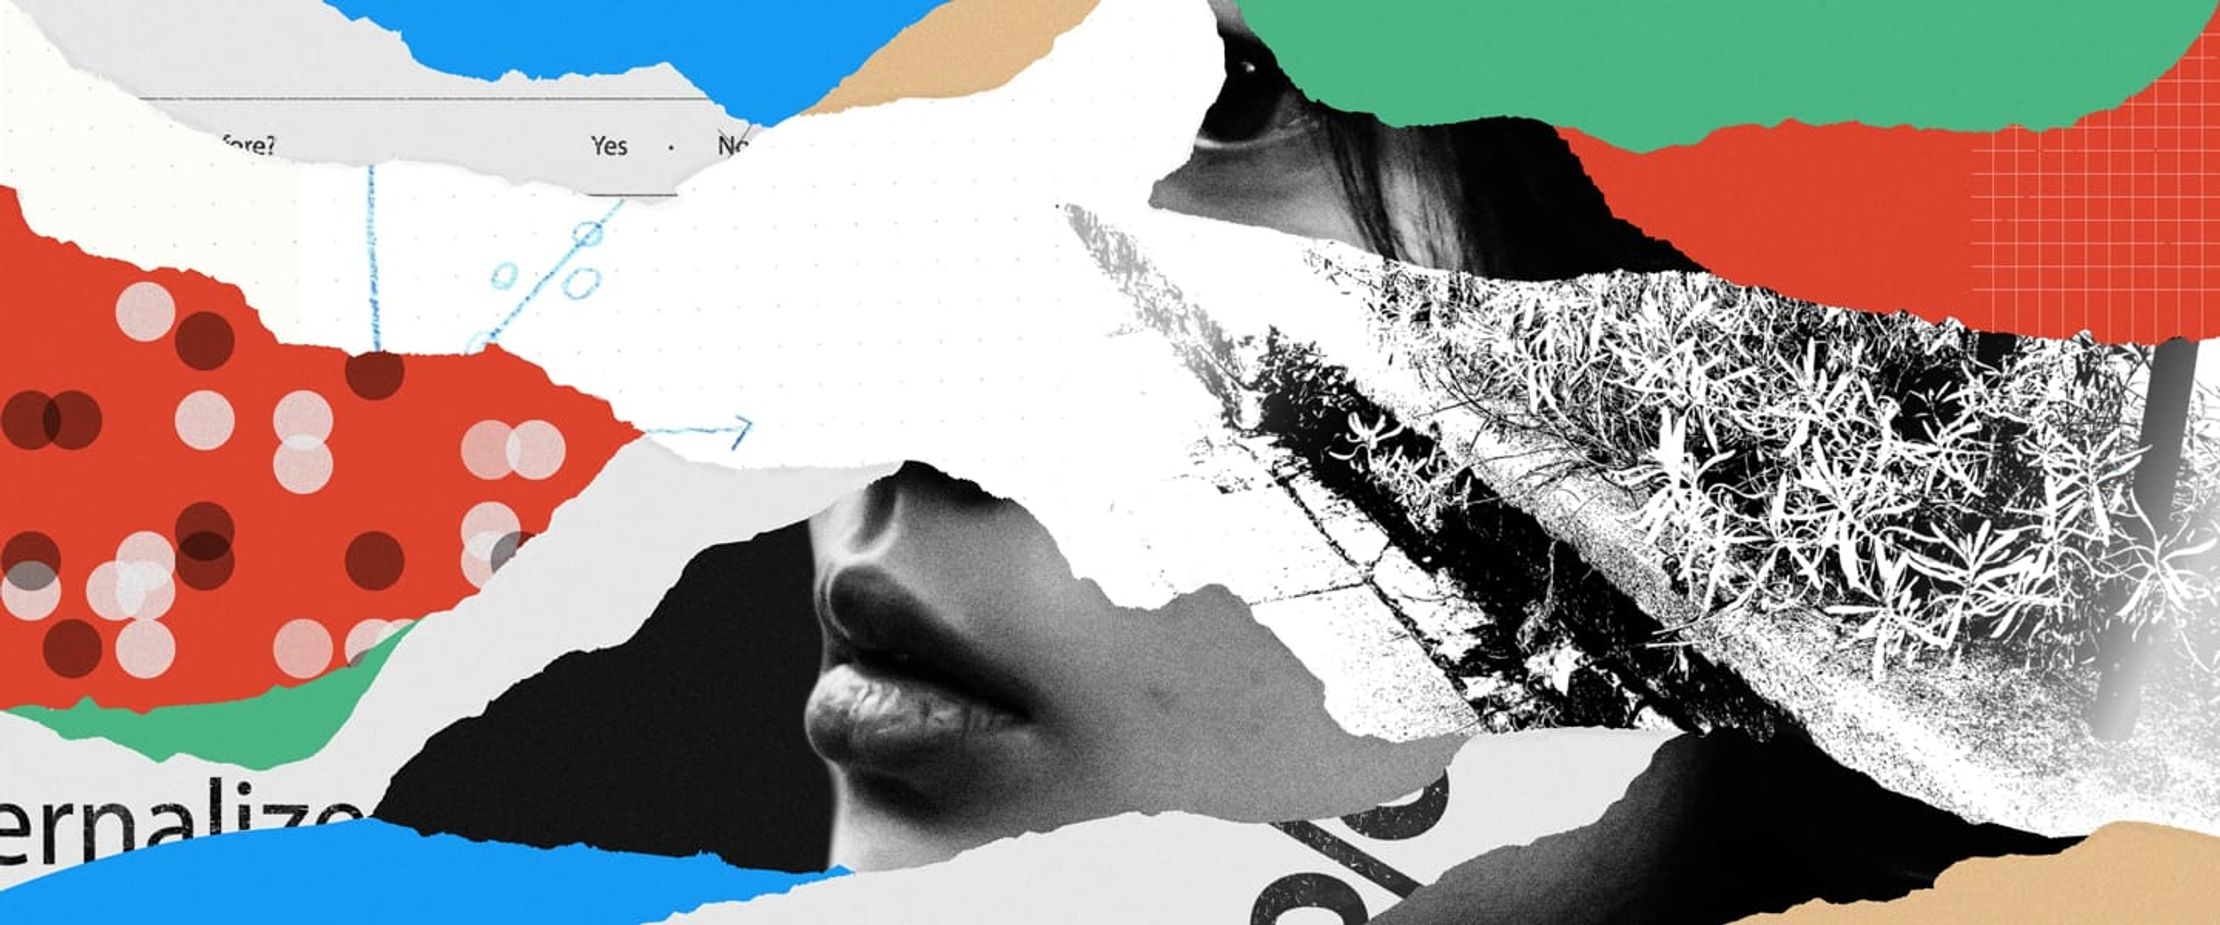 A collage of images designed to look like torn scraps of paper. A woman's mouth and hair is visible in two scraps while the rest are a mix of text, colours, data visualization and photography.